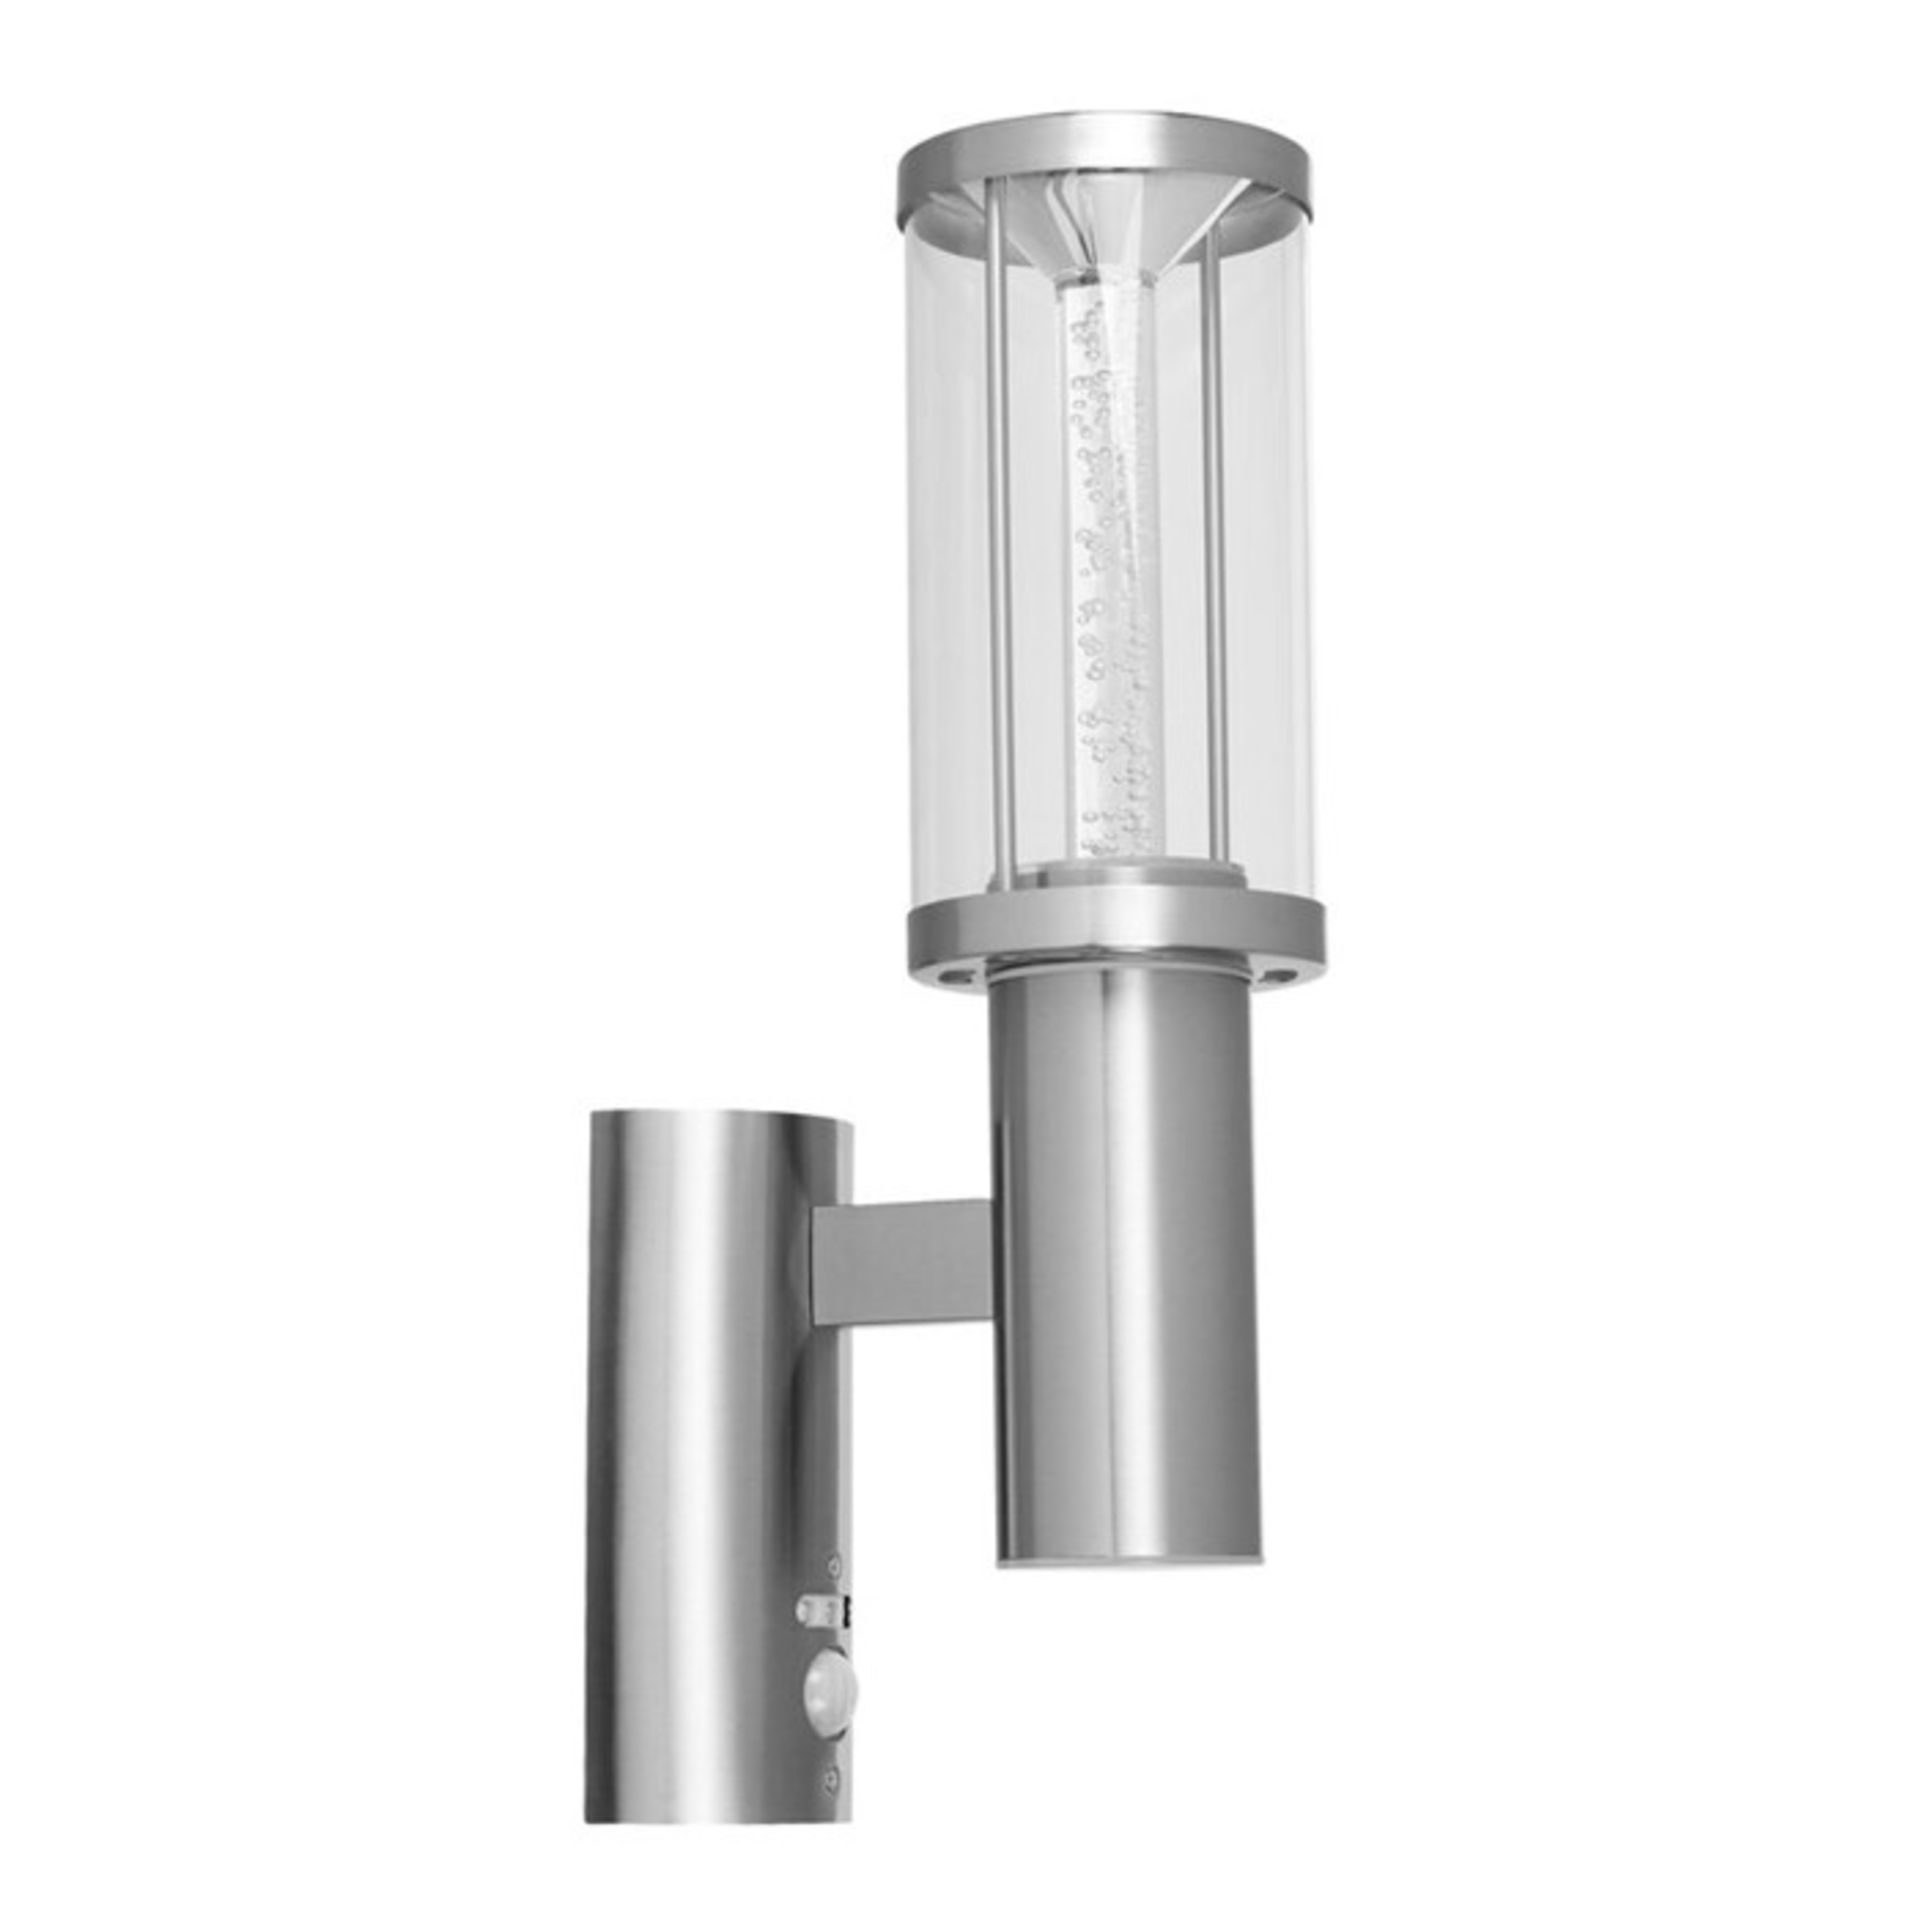 Eglo,Trono 1 Light Outdoor Sconce with Motion Sensor - RRP £73.99 (EGF4095 - 9473/49) 6F